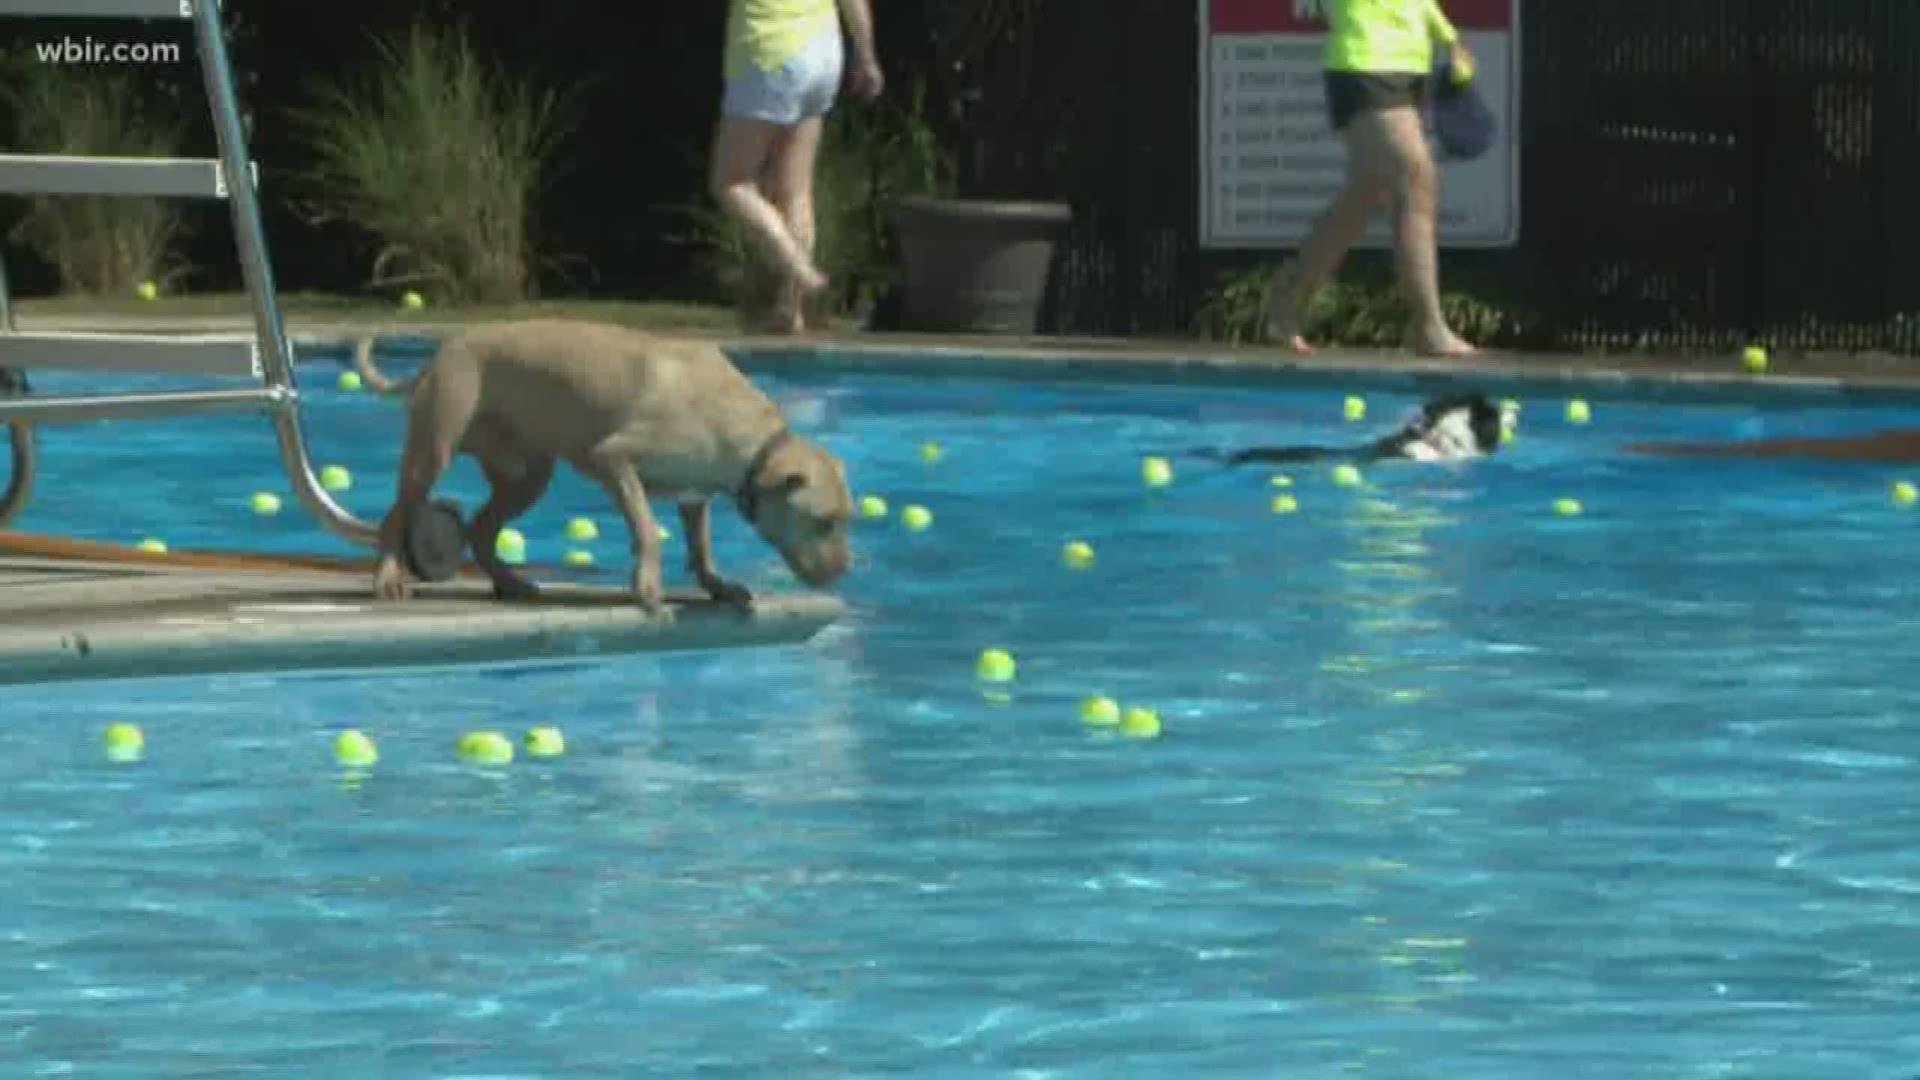 Pool season for humans might have wrapped up on Labor Day, but on Sunday, it was the doggos' turn.